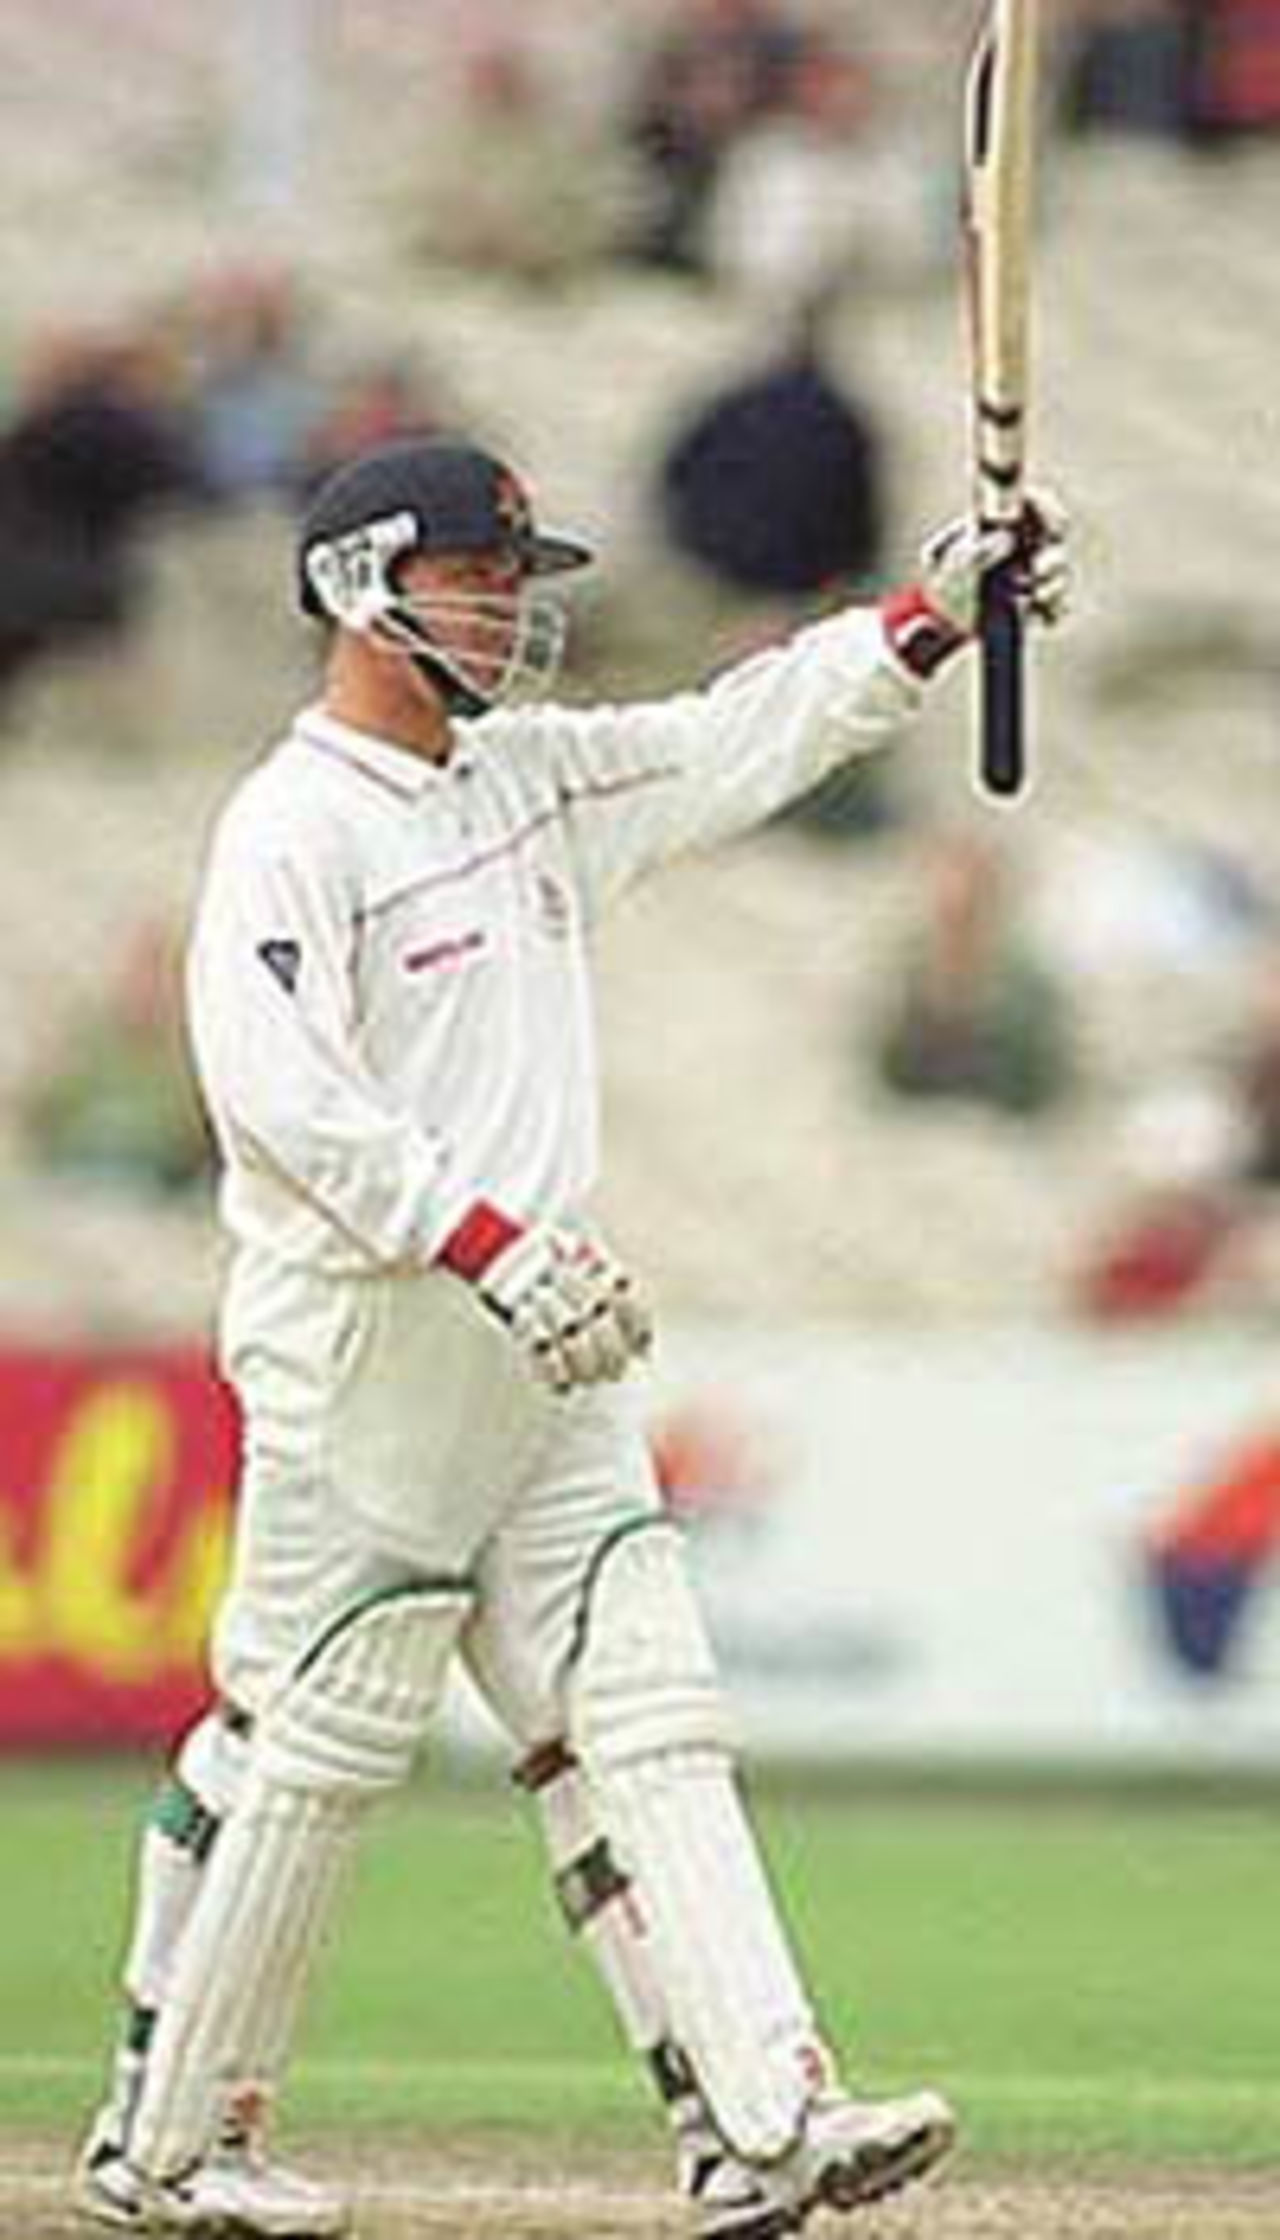 Warren Hegg raises bat in acknowledgement after reaching 50, PPP healthcare County Championship Division One, 2000, Lancashire v Surrey, Old Trafford, Manchester, 13-16 September 2000(Day 1).